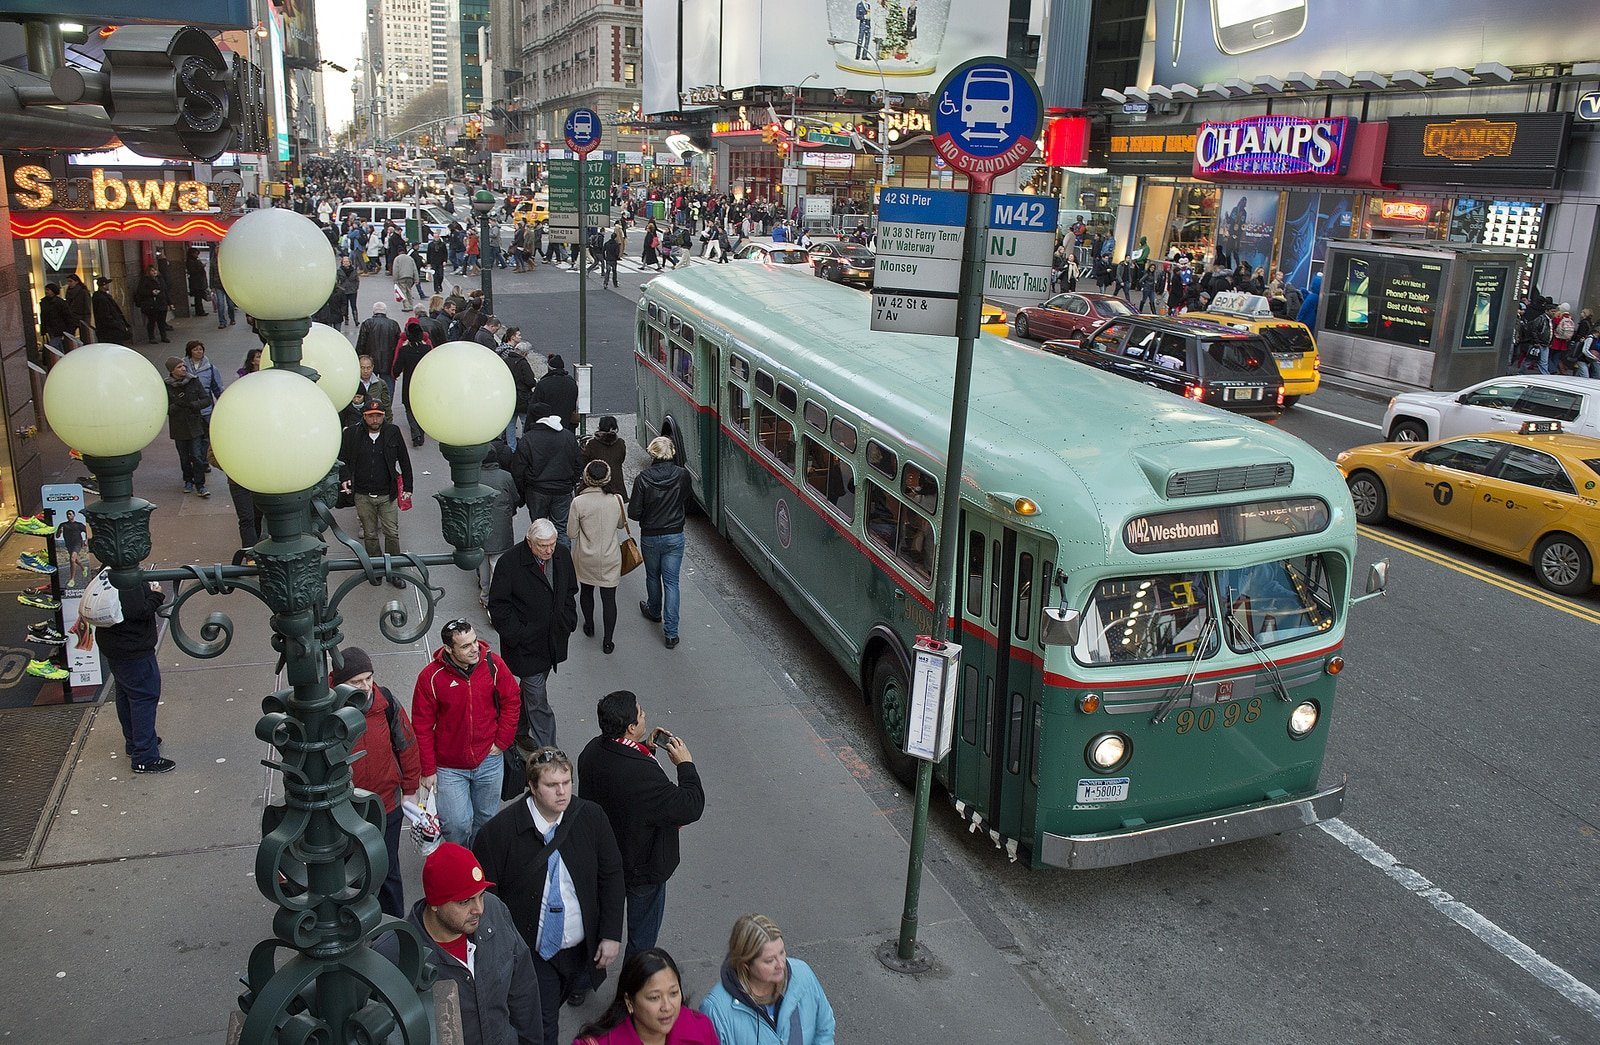 How to get in the past? A ride on the Manhattan vintage bus